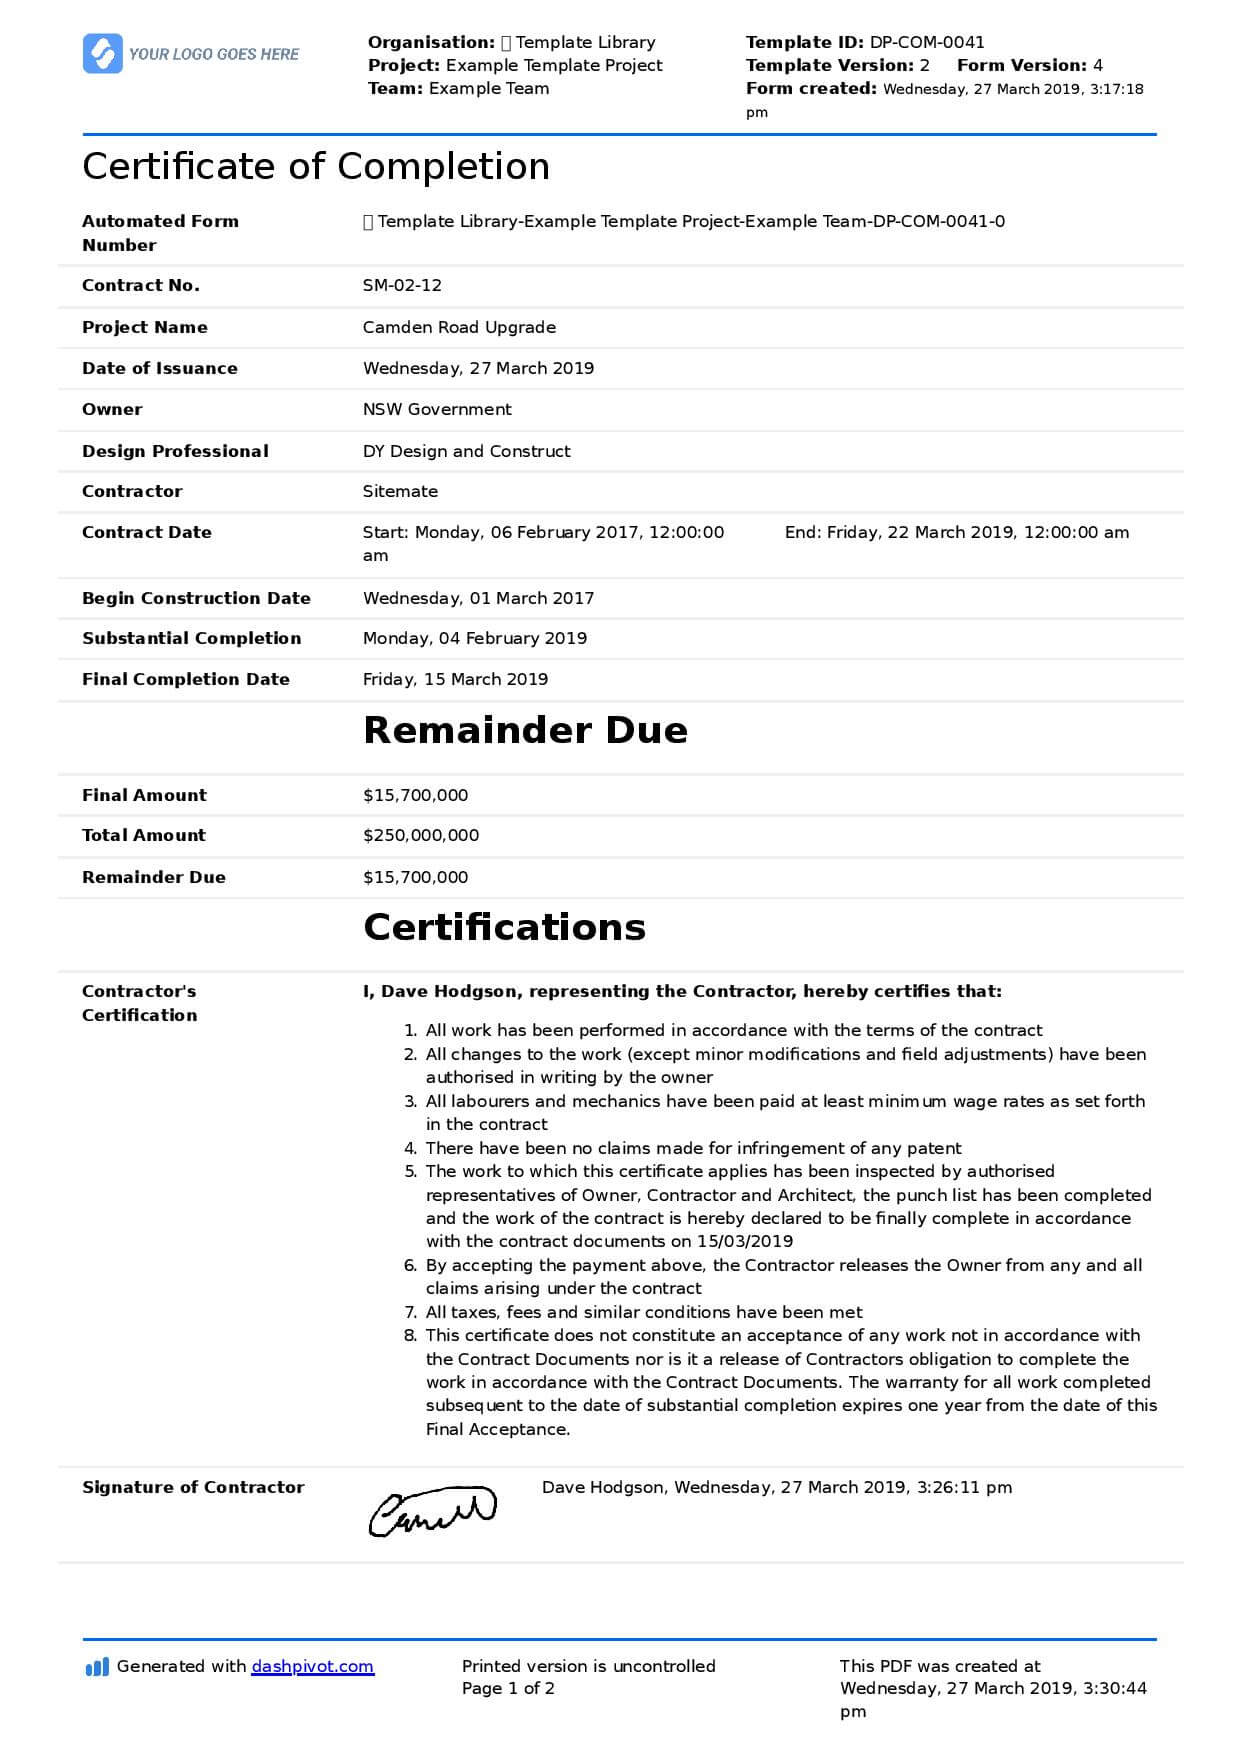 Certificate Of Completion For Construction (Free Template + Regarding Certificate Of Completion Construction Templates